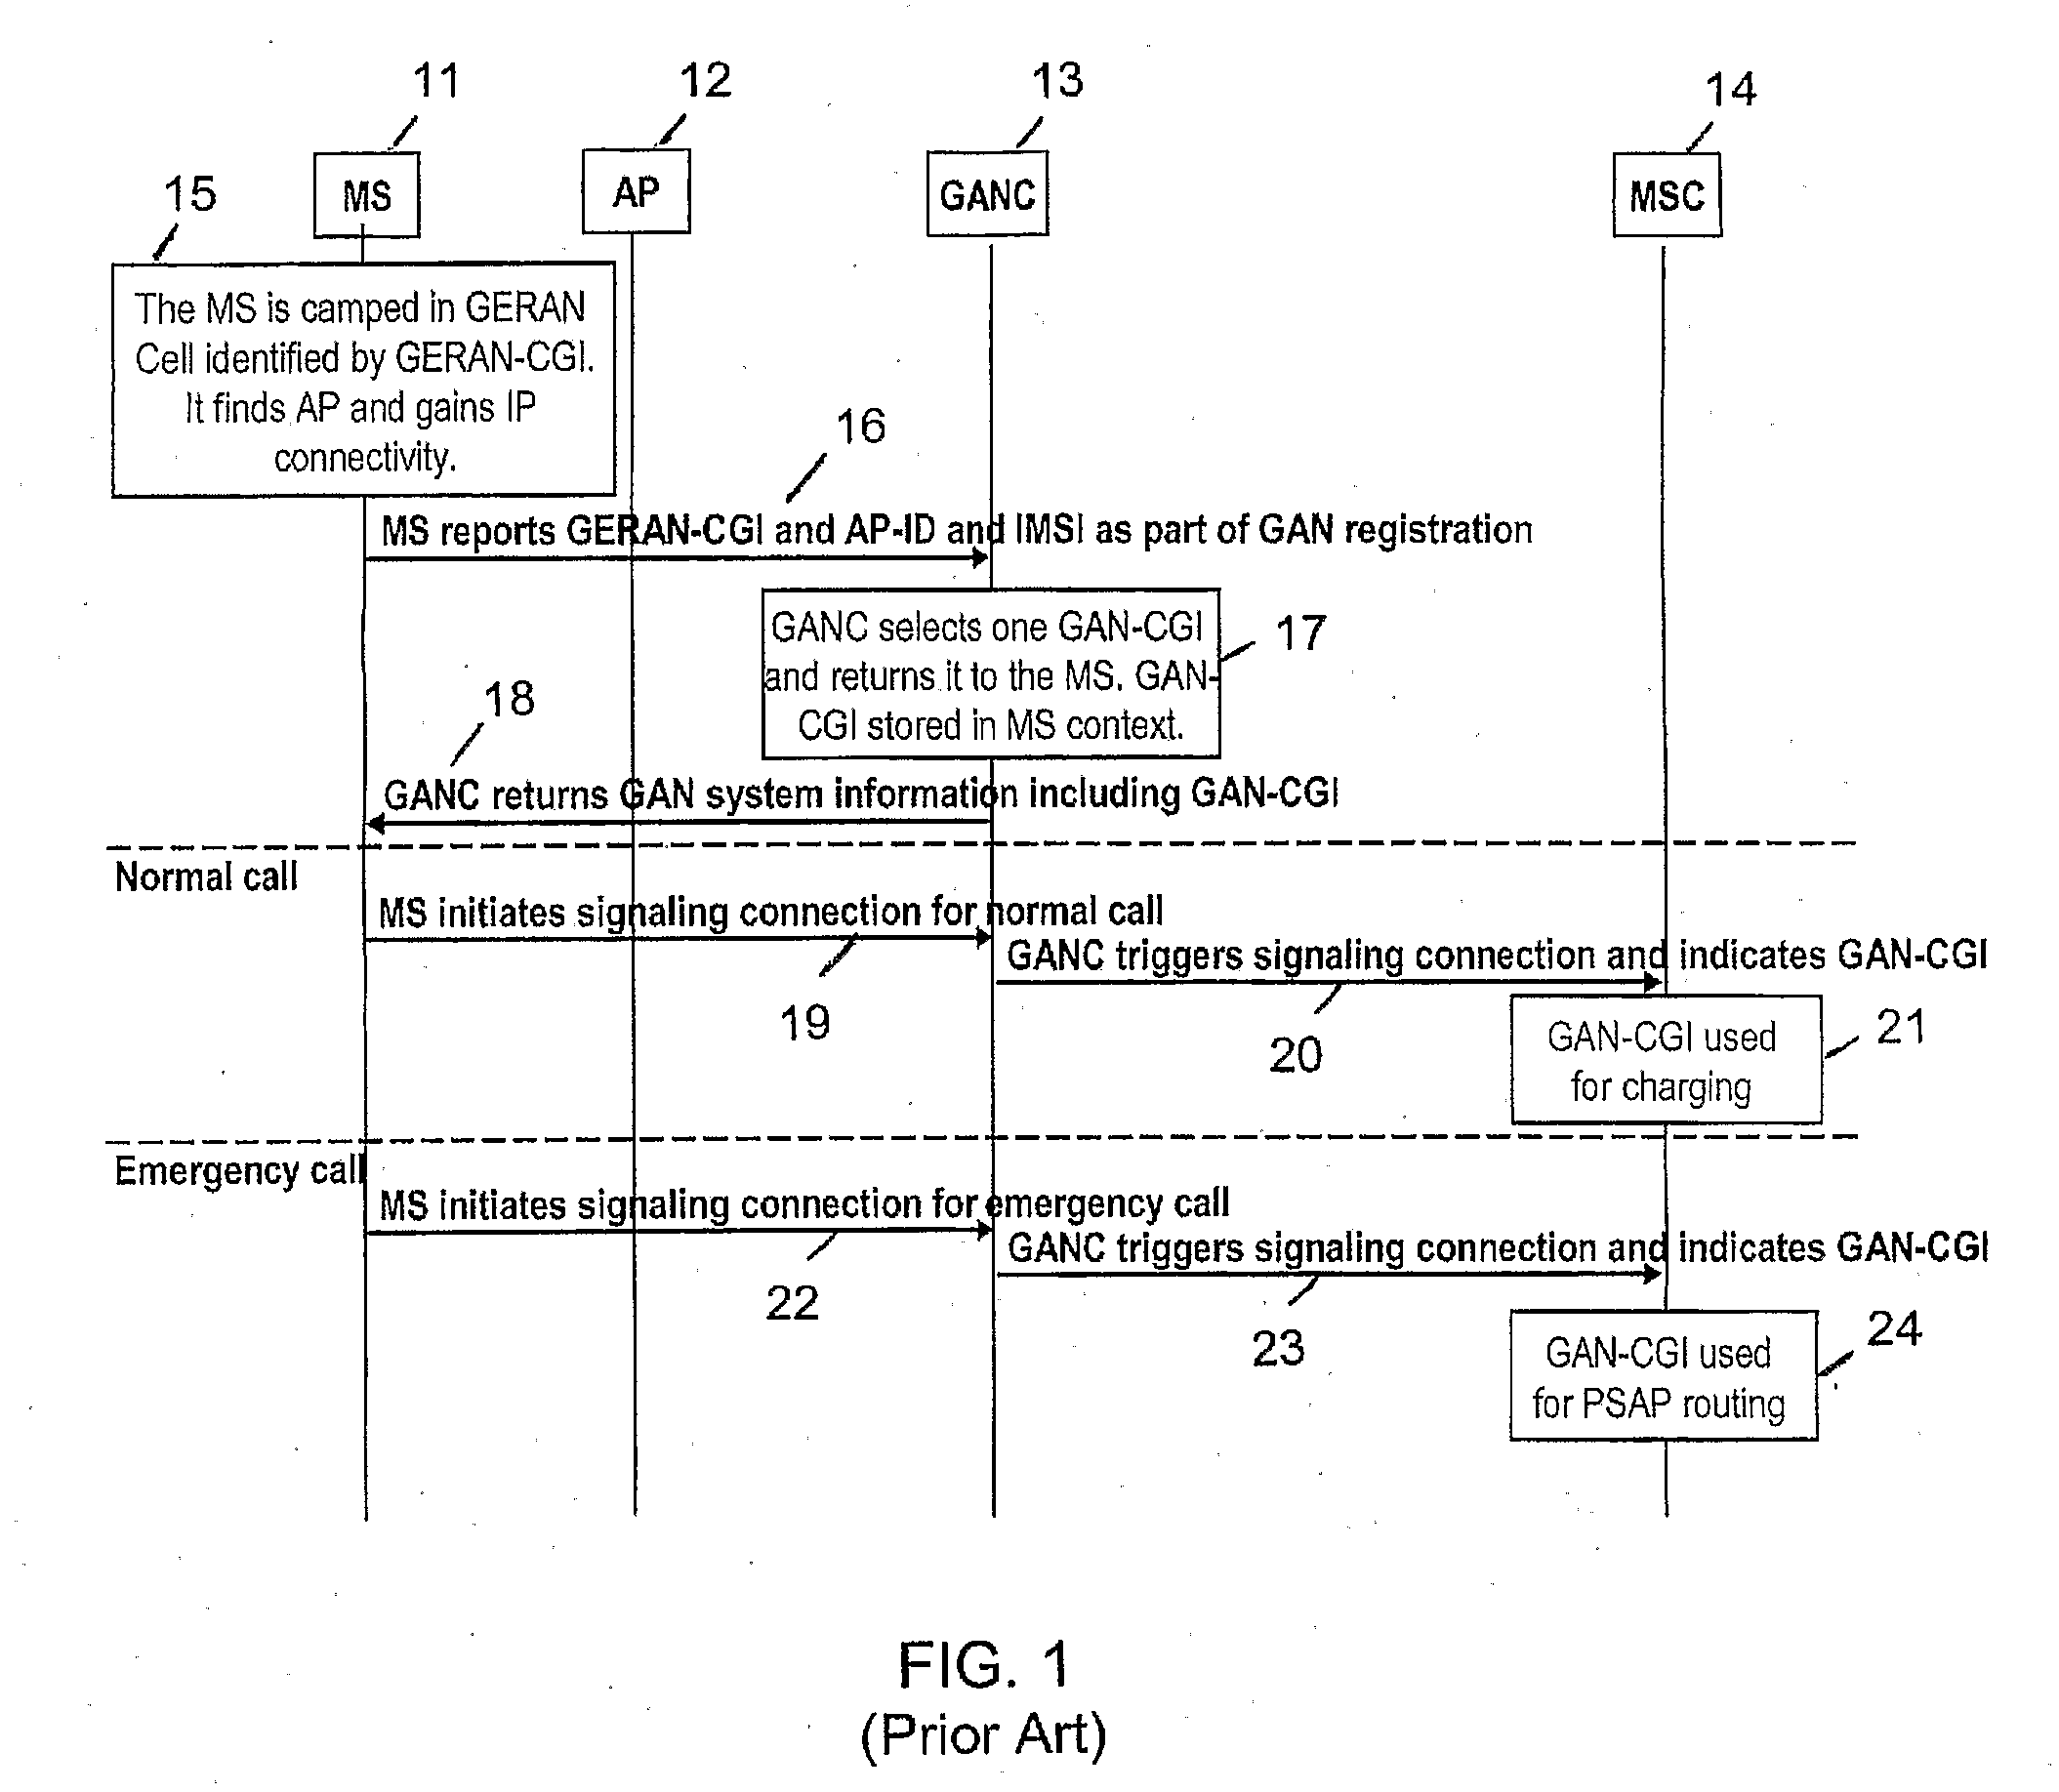 Charging and location indications in a generic access network